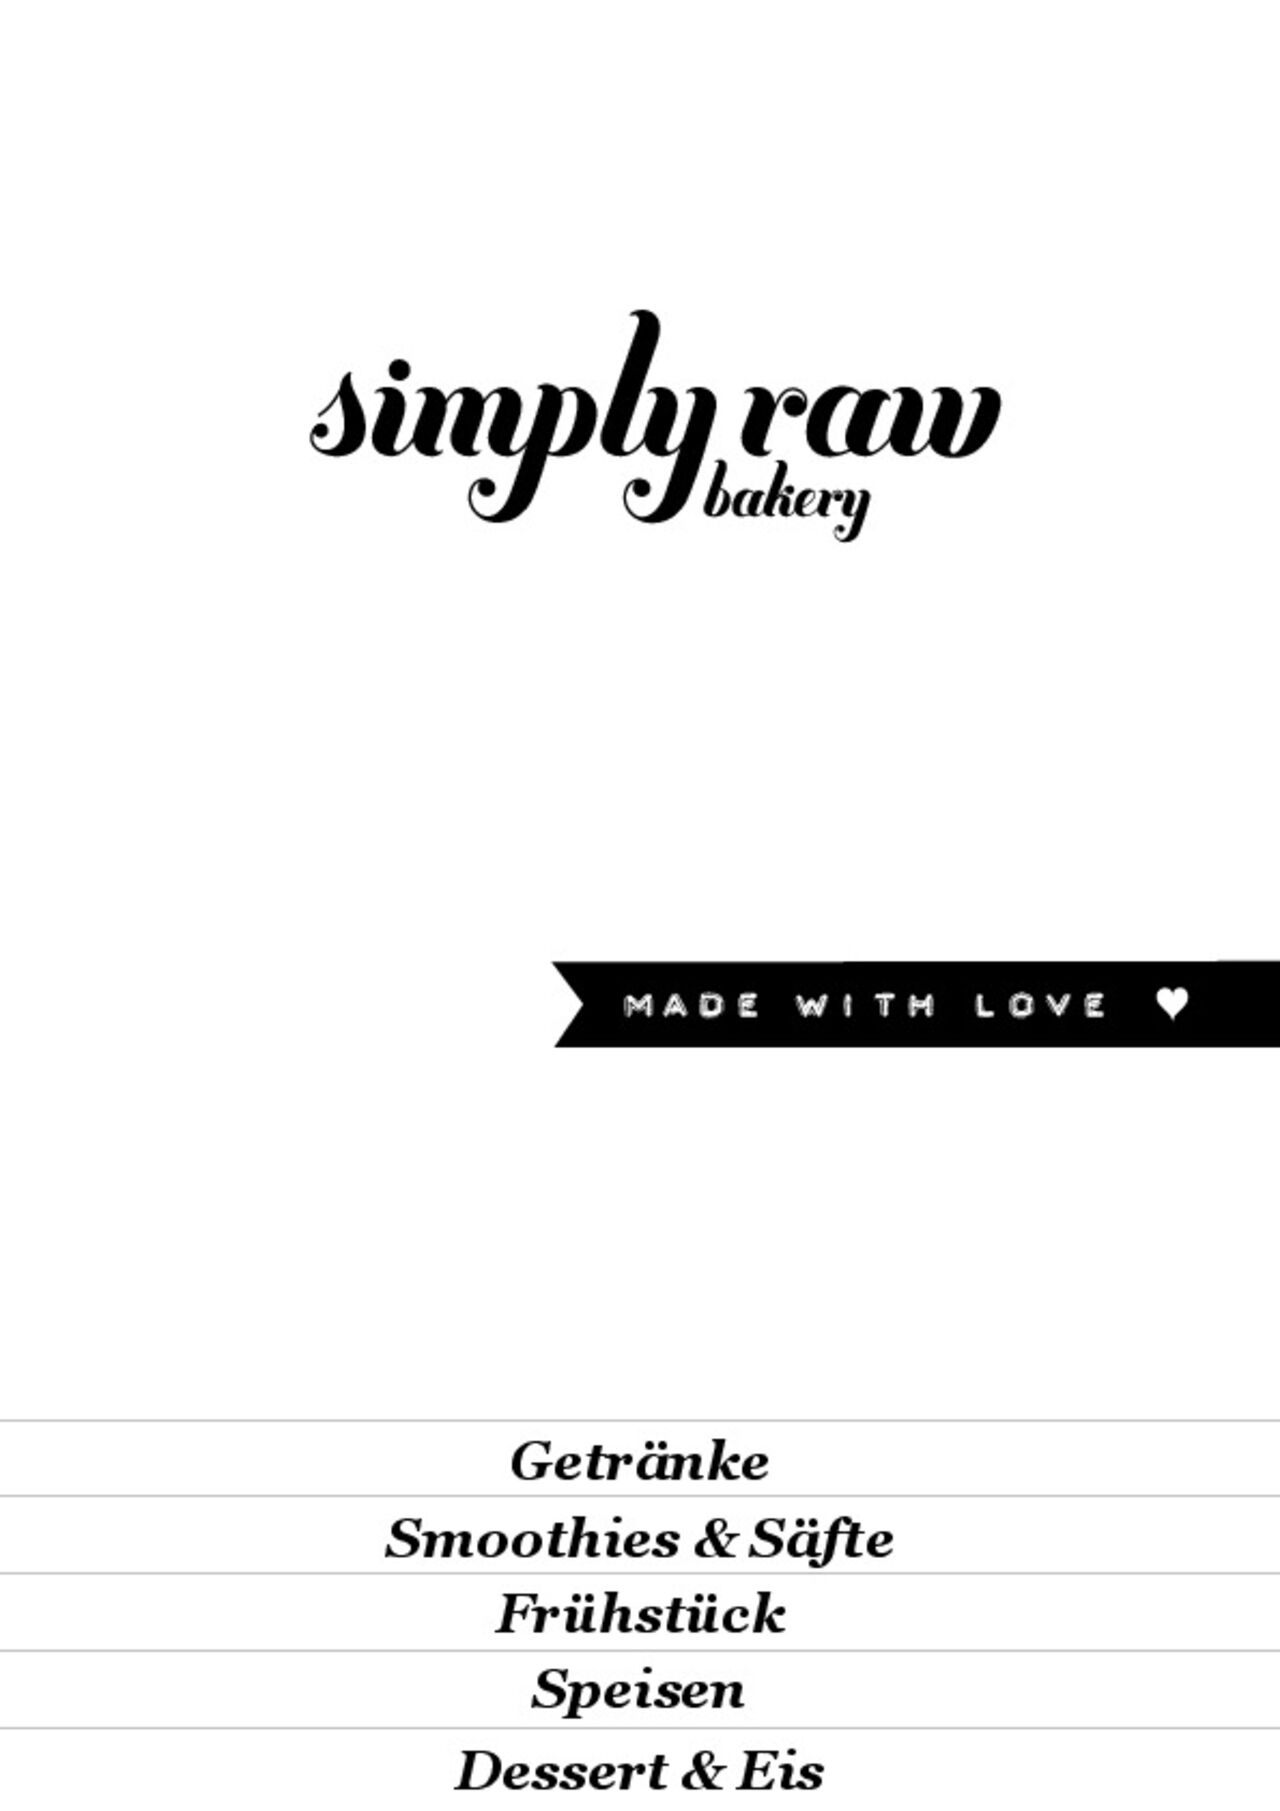 A photo of simply raw bakery